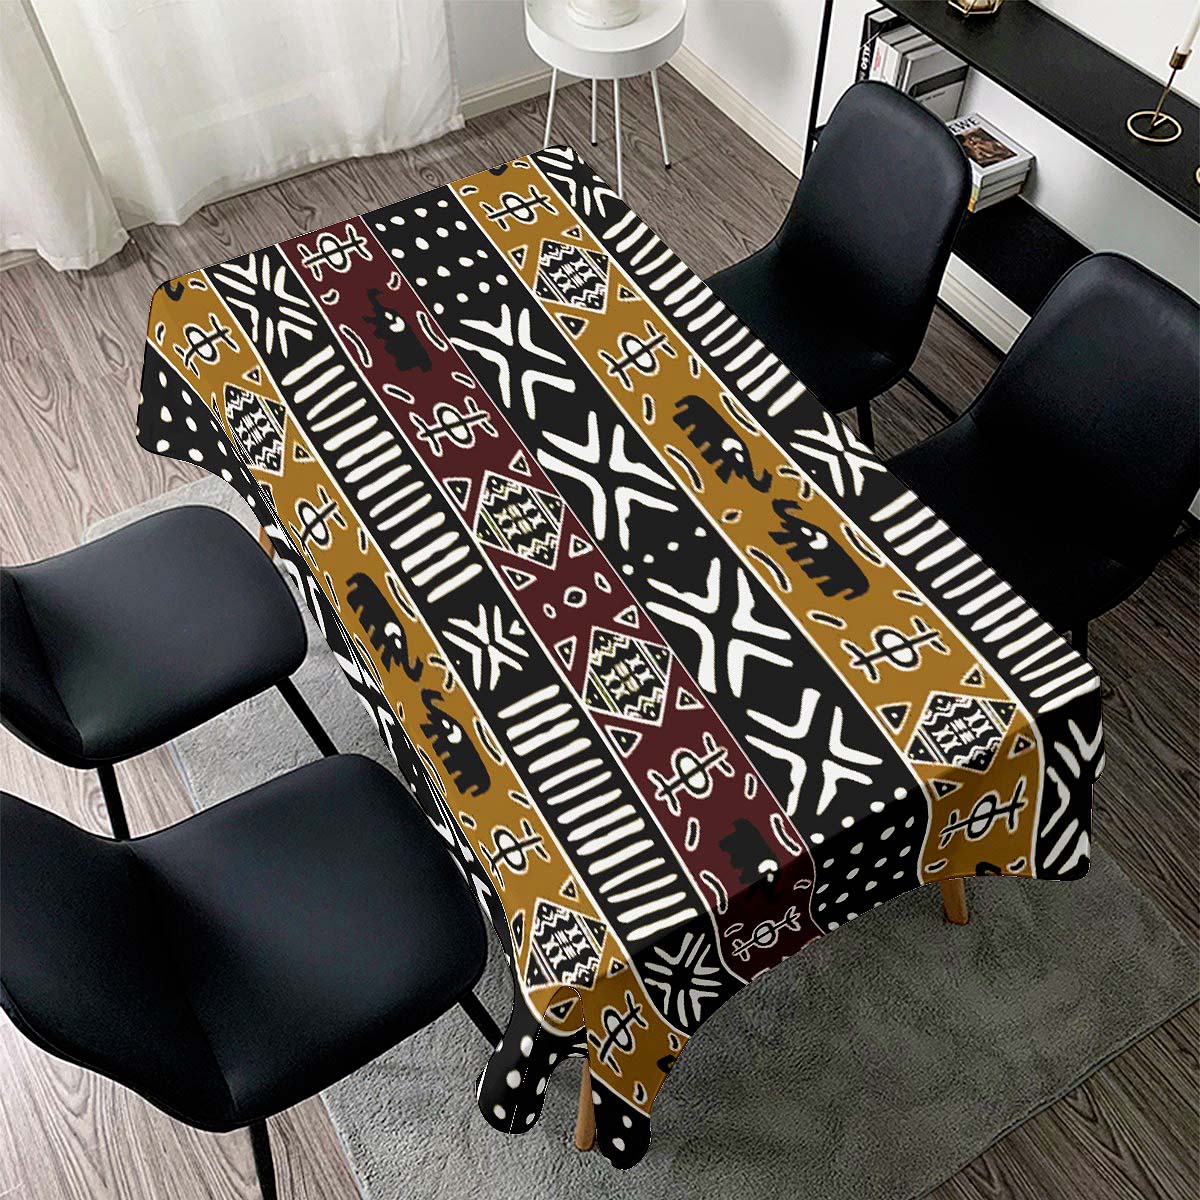 Mudcloth Print African Tablecloth - Bynelo